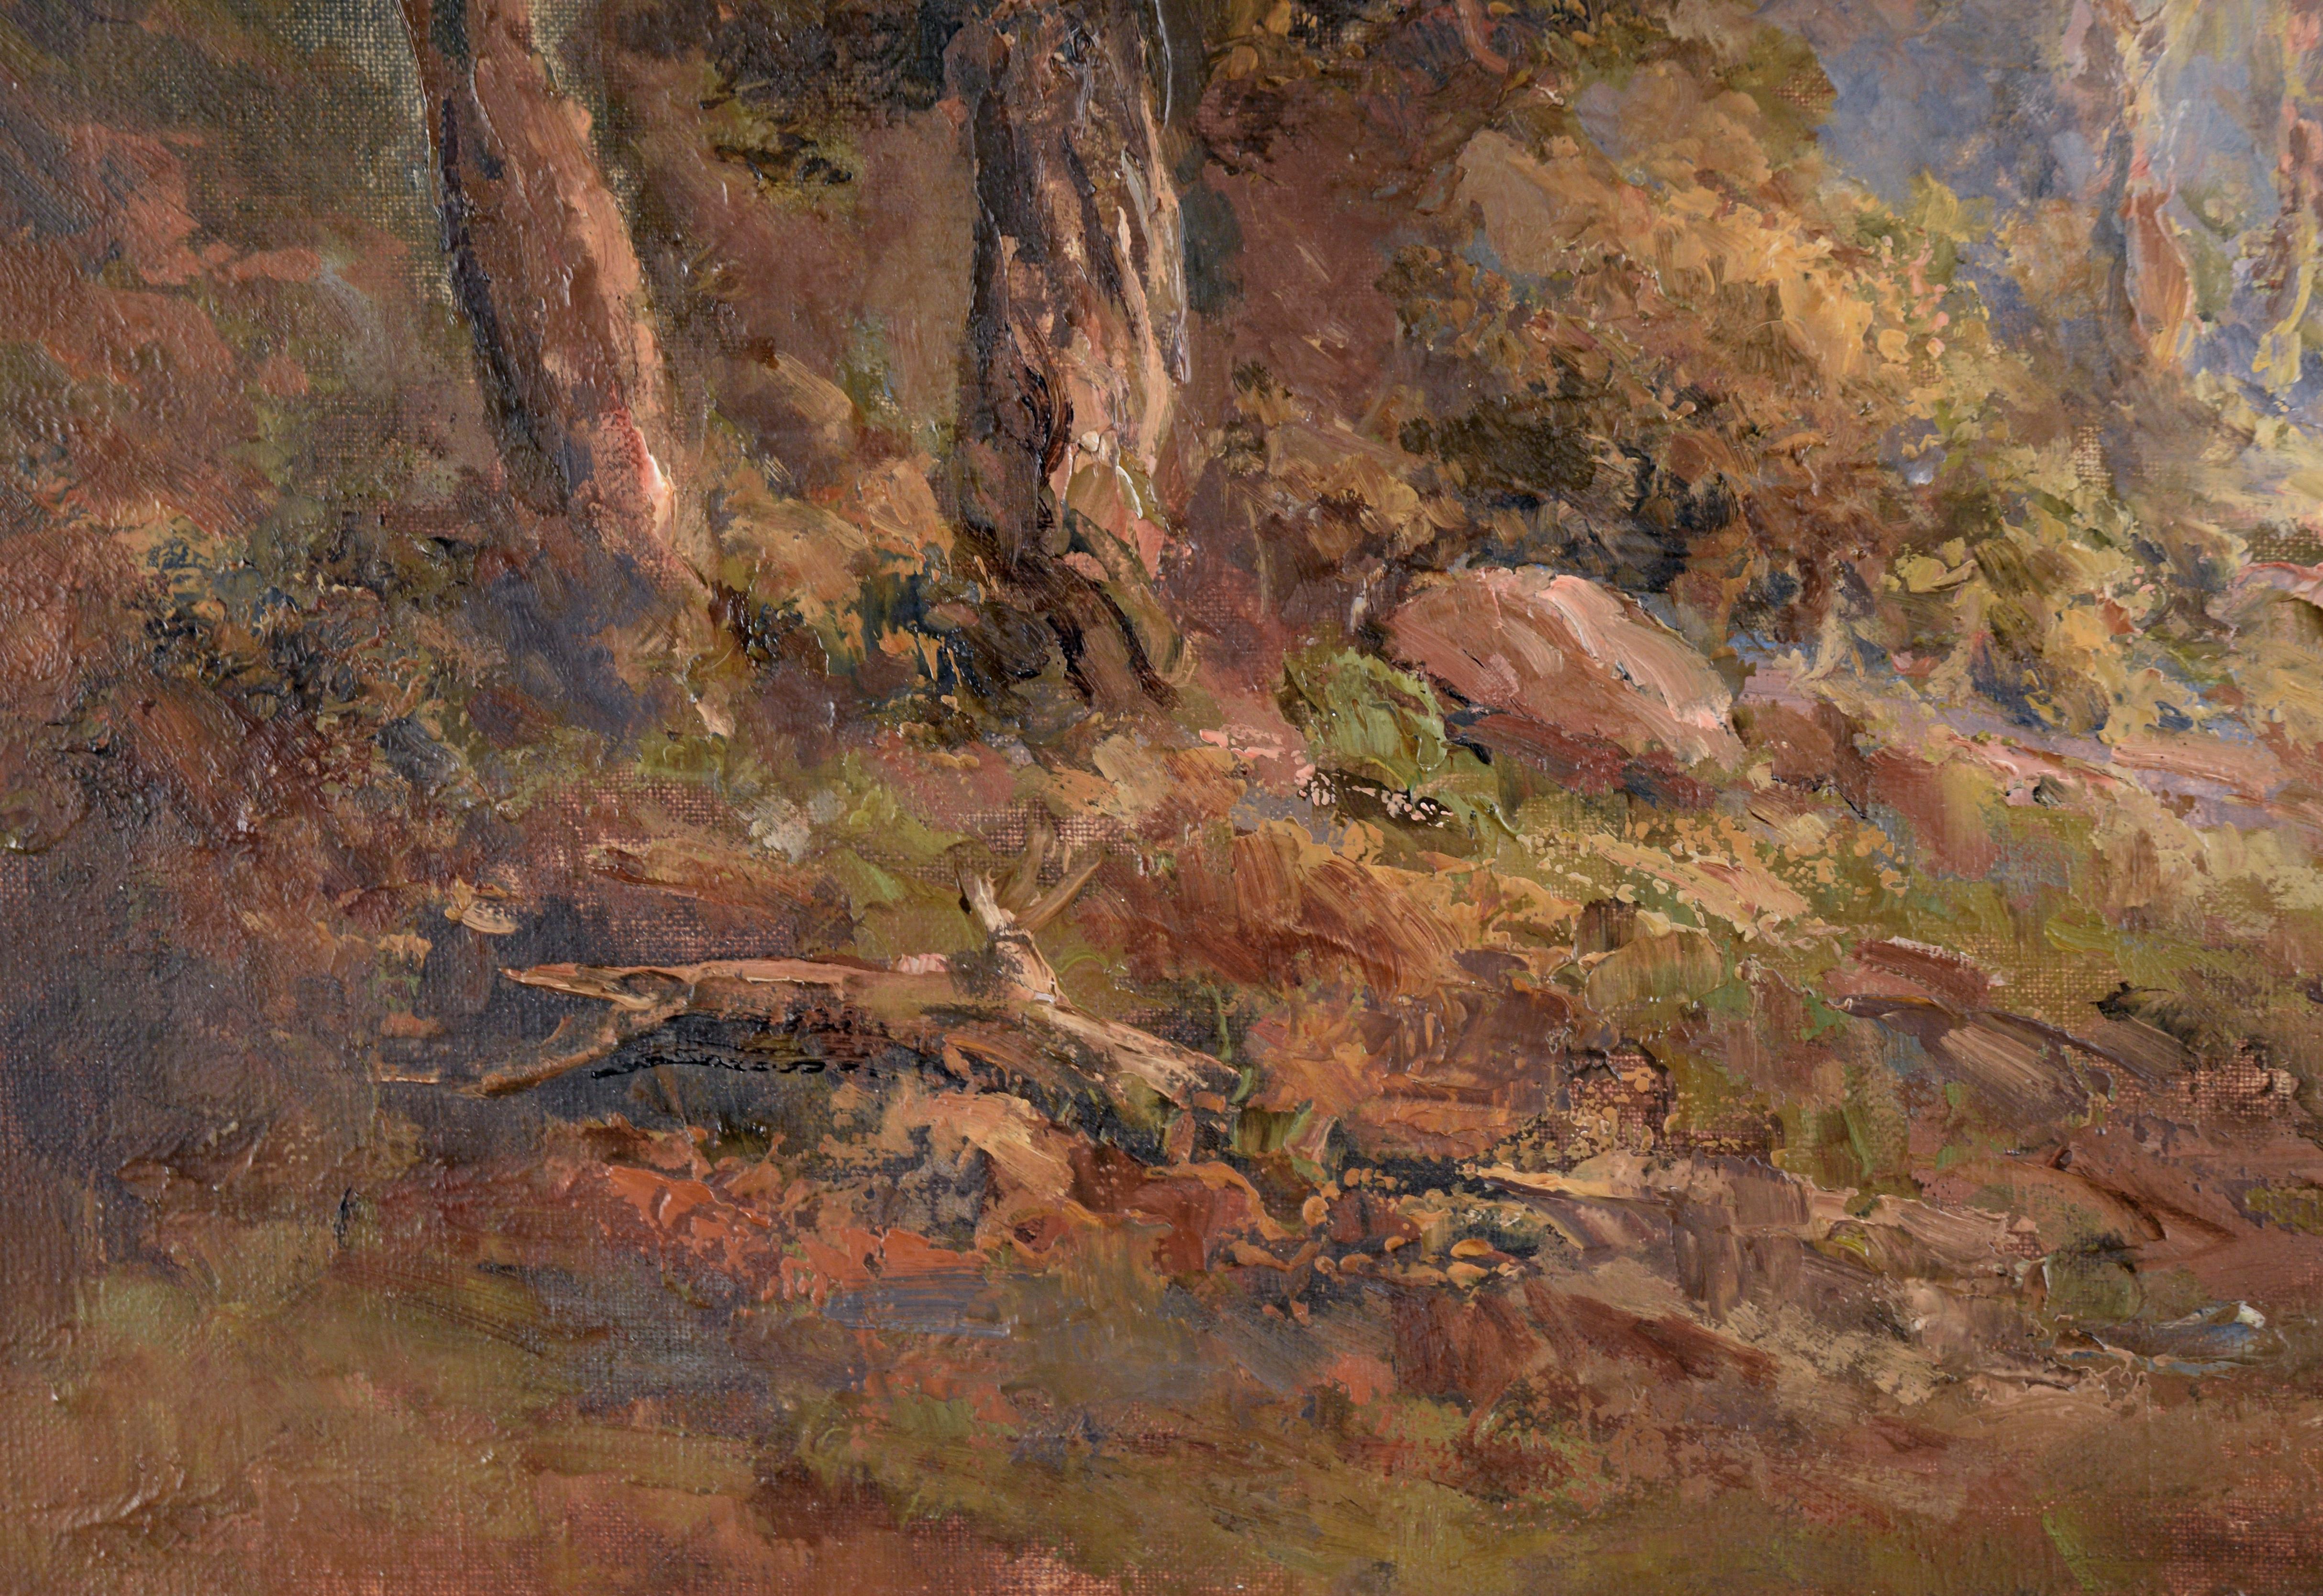 Path Out of the Woods - Naturalist Landscape in Oil on Canvas - Brown Landscape Painting by Charles Harmon